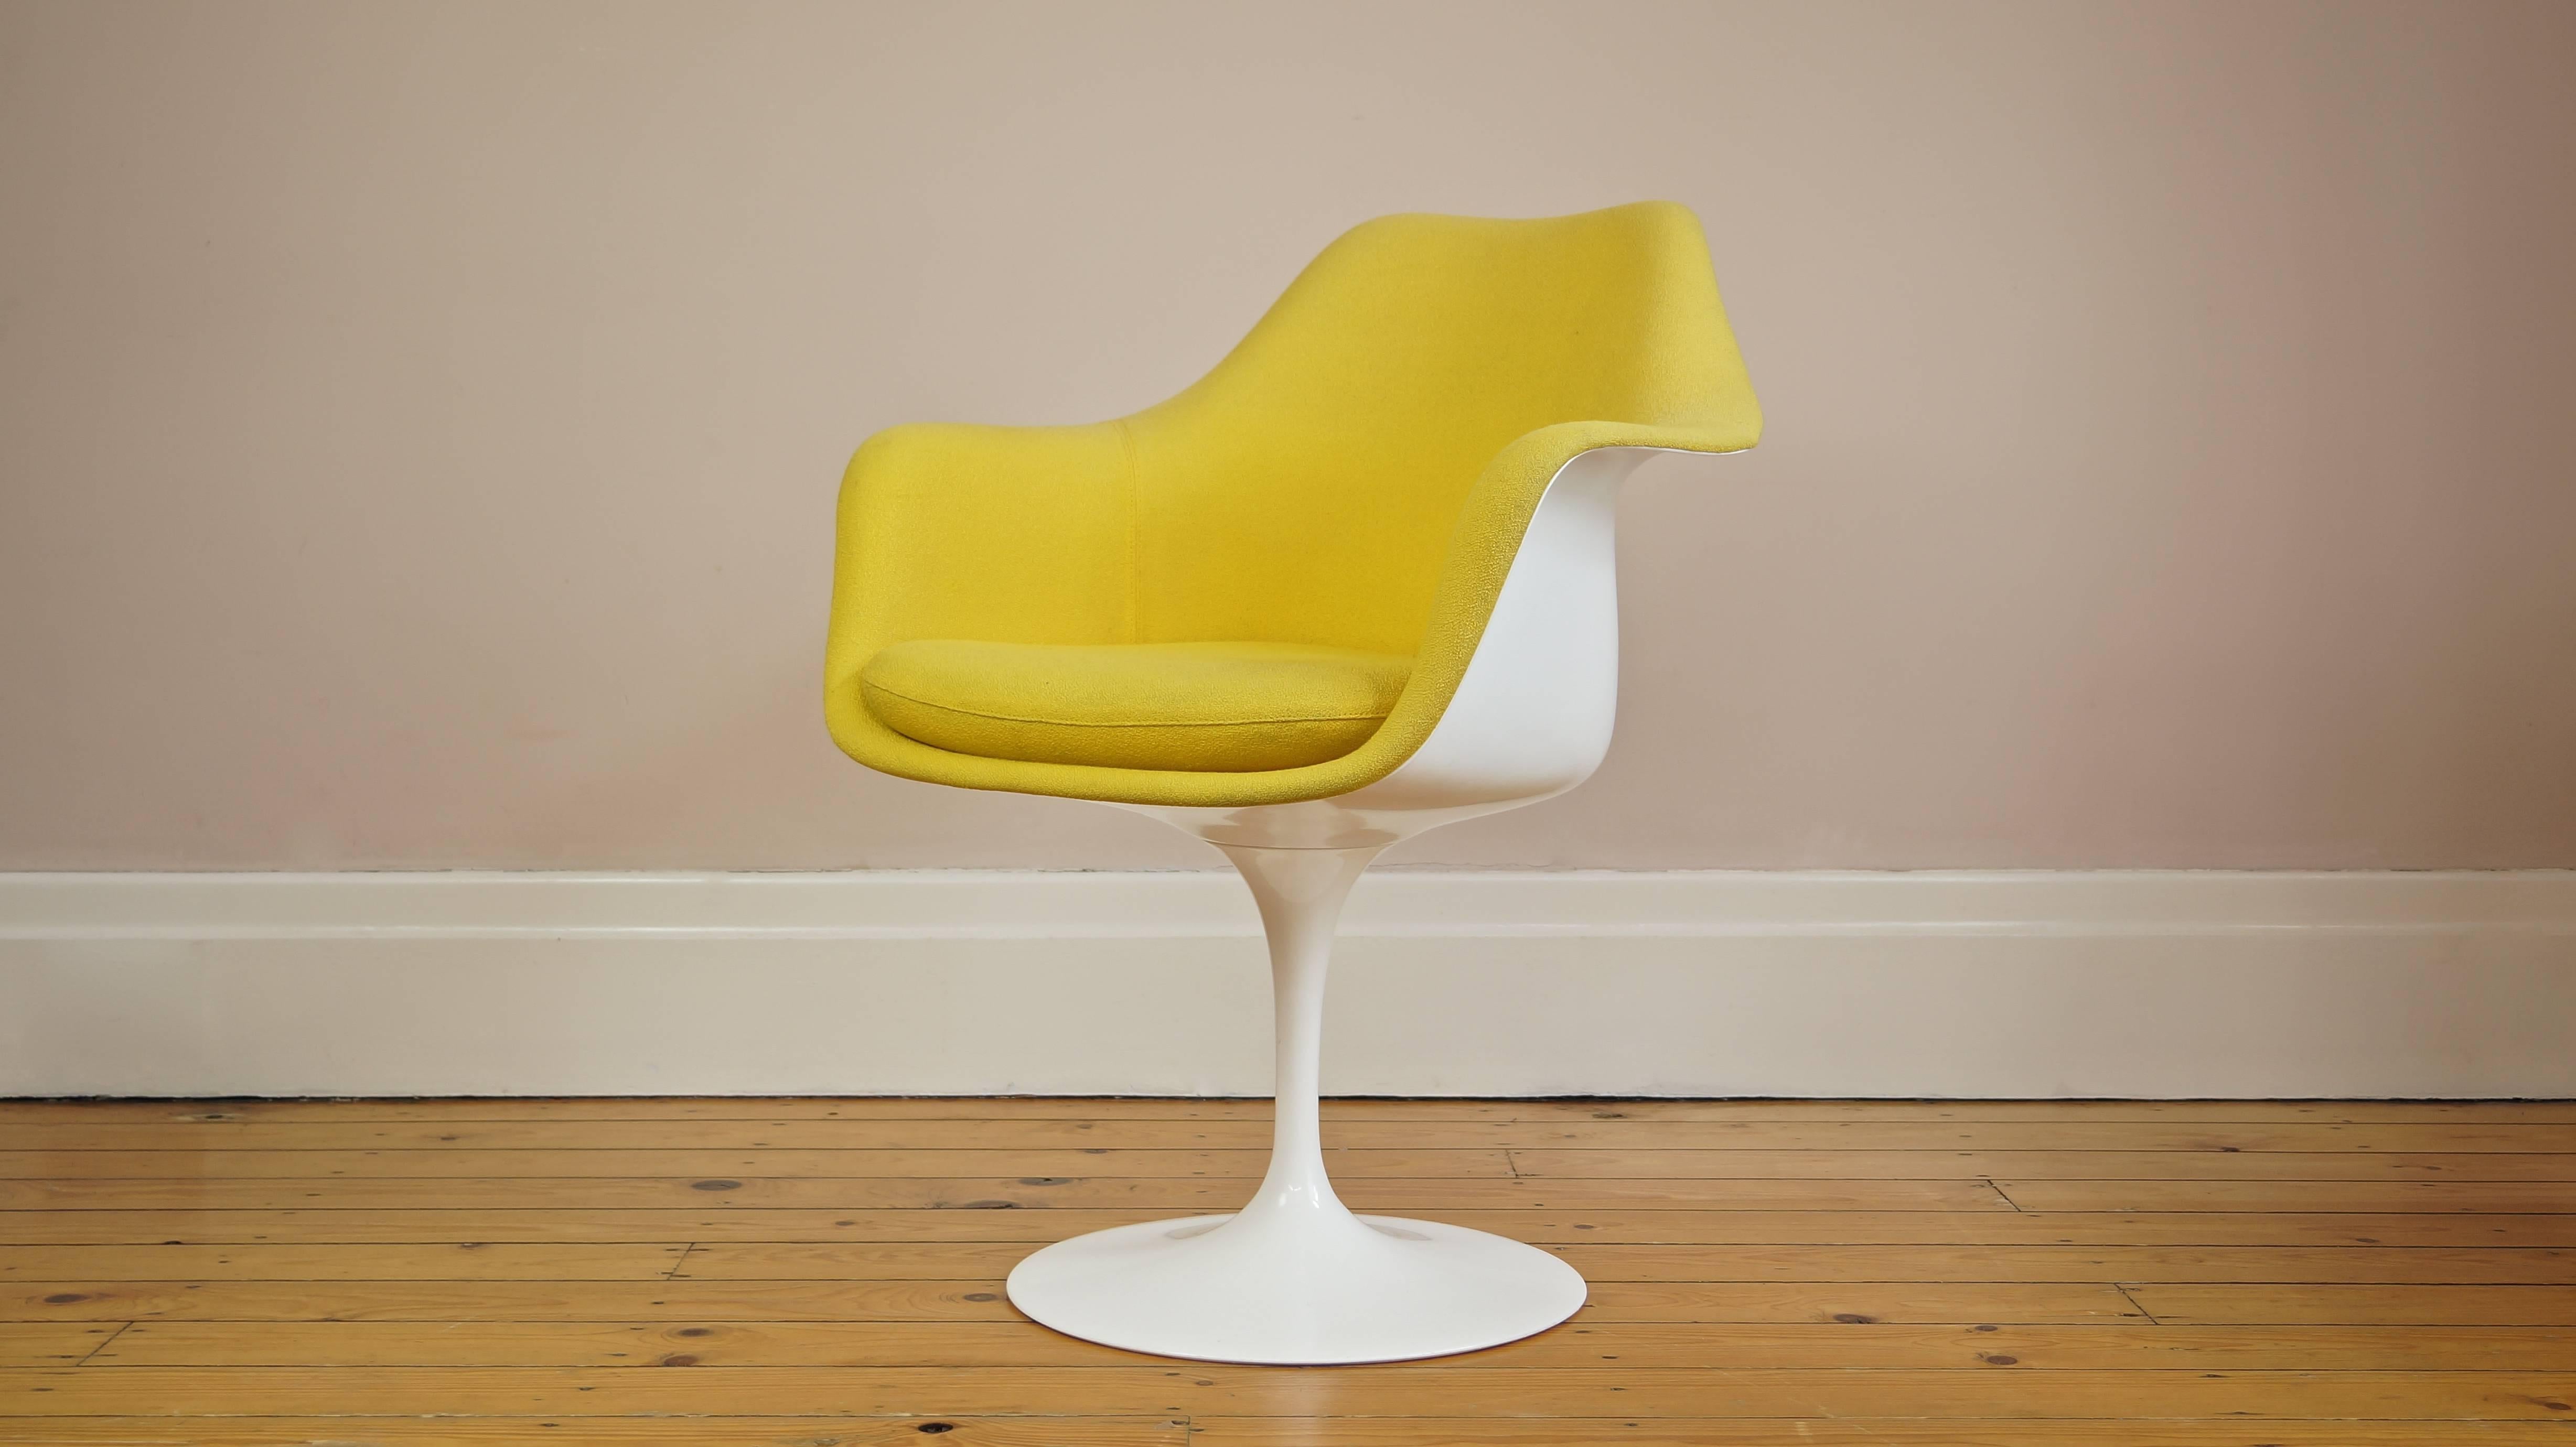 Authentic Knoll Tulip armchair. 

Designer: Eero Saarinen - Knoll USA.
Designed circa 1956.

A genuine Eero Saarinen Tulip armchair, manufactured by Knoll.

Incredibly rare fully upholstered version, offered here in yellow wool.

These were